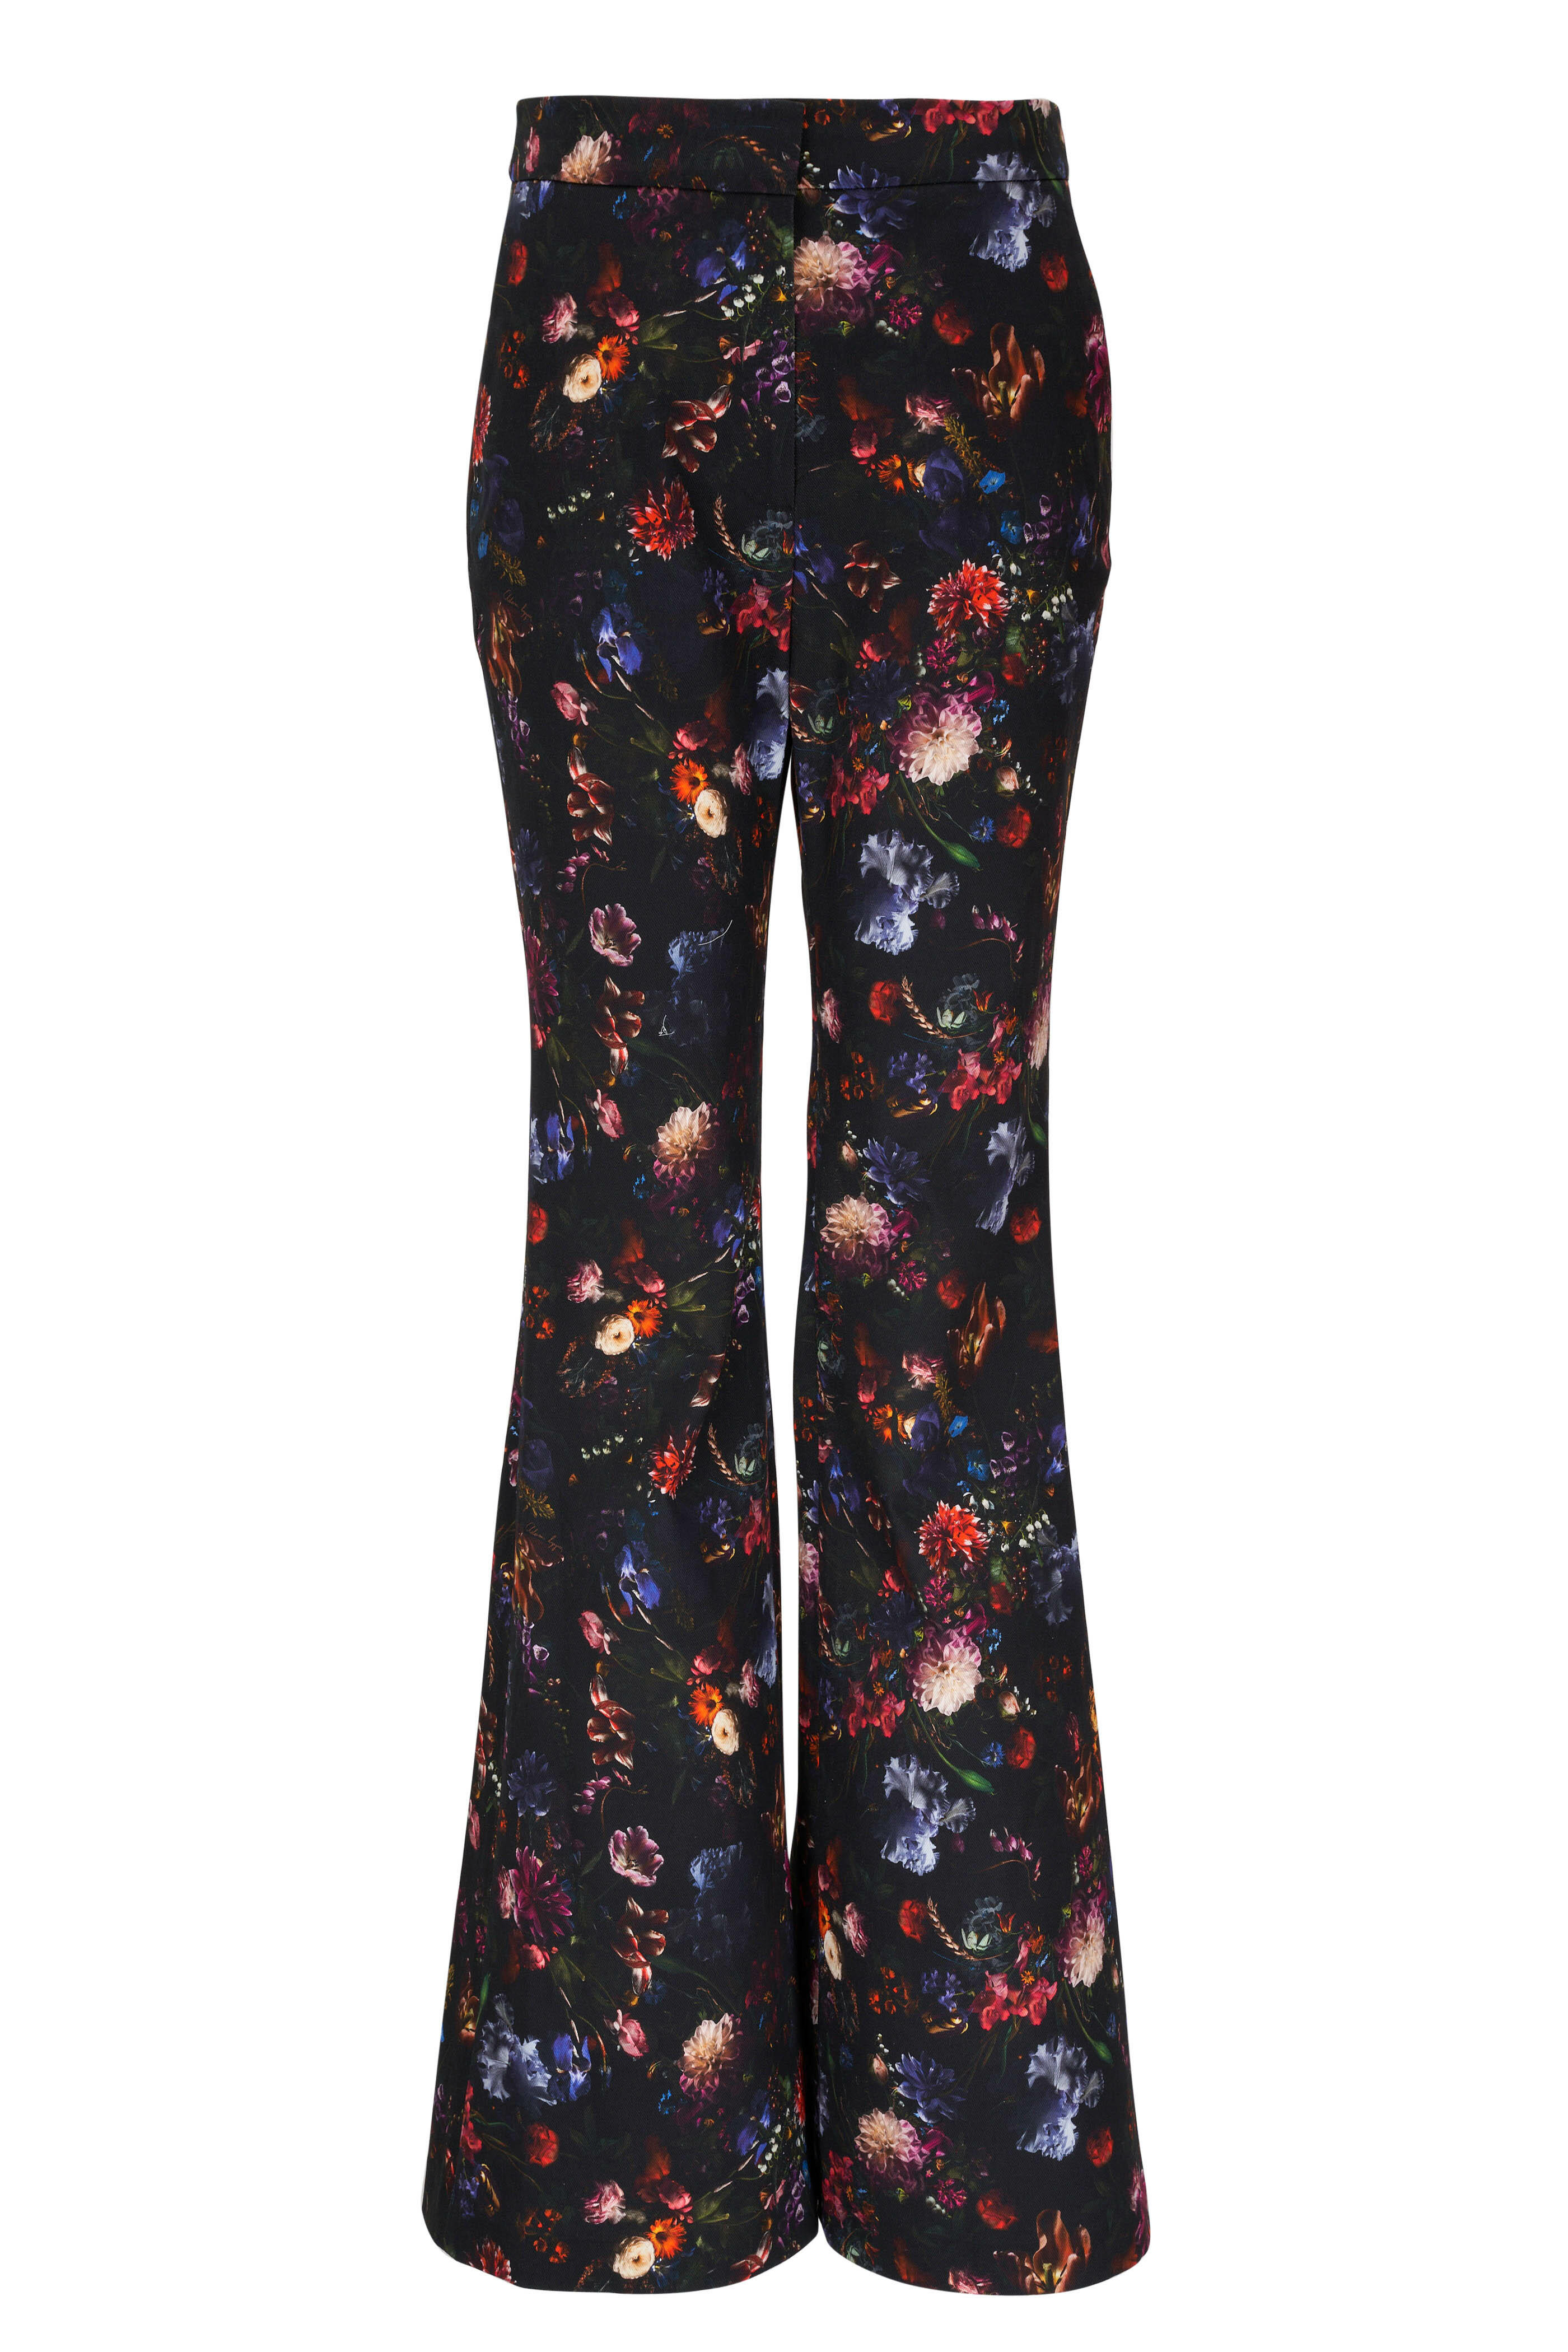 Adam Lippes - Kennedy Black Floral Printed Pant | Mitchell Stores